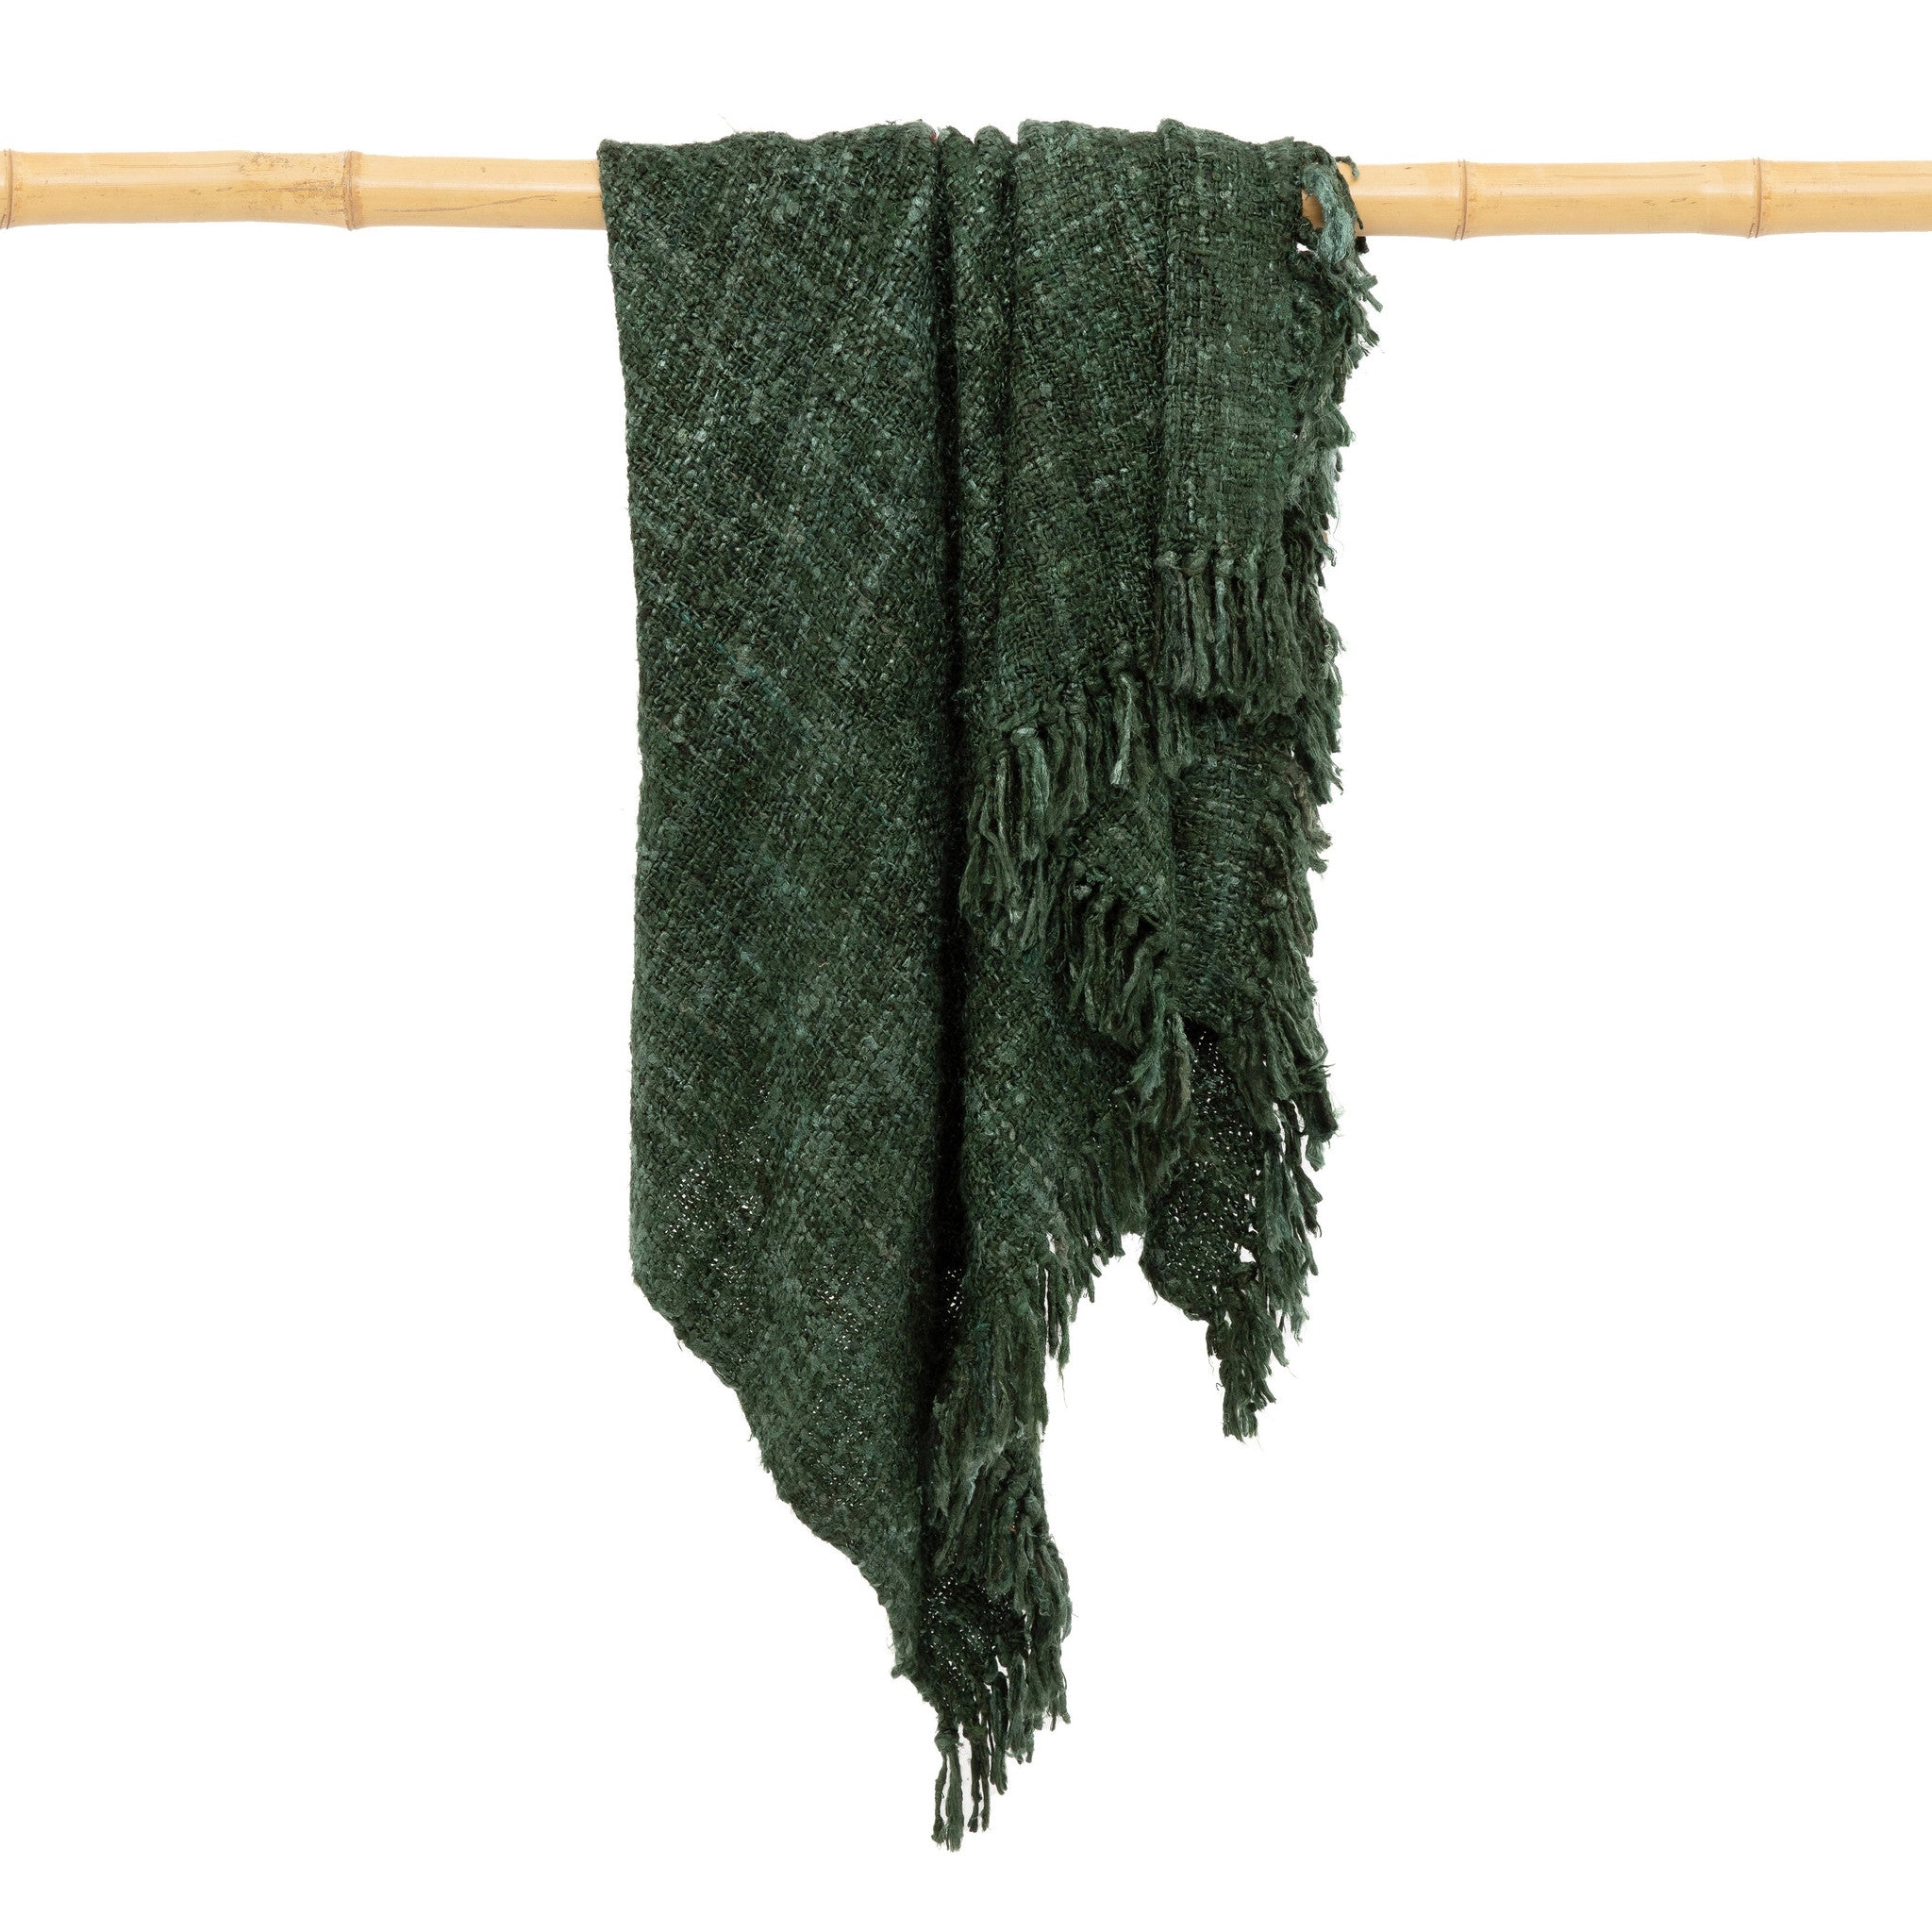 THE S'IL VOUS Plaid Forest Green on bamboo stick